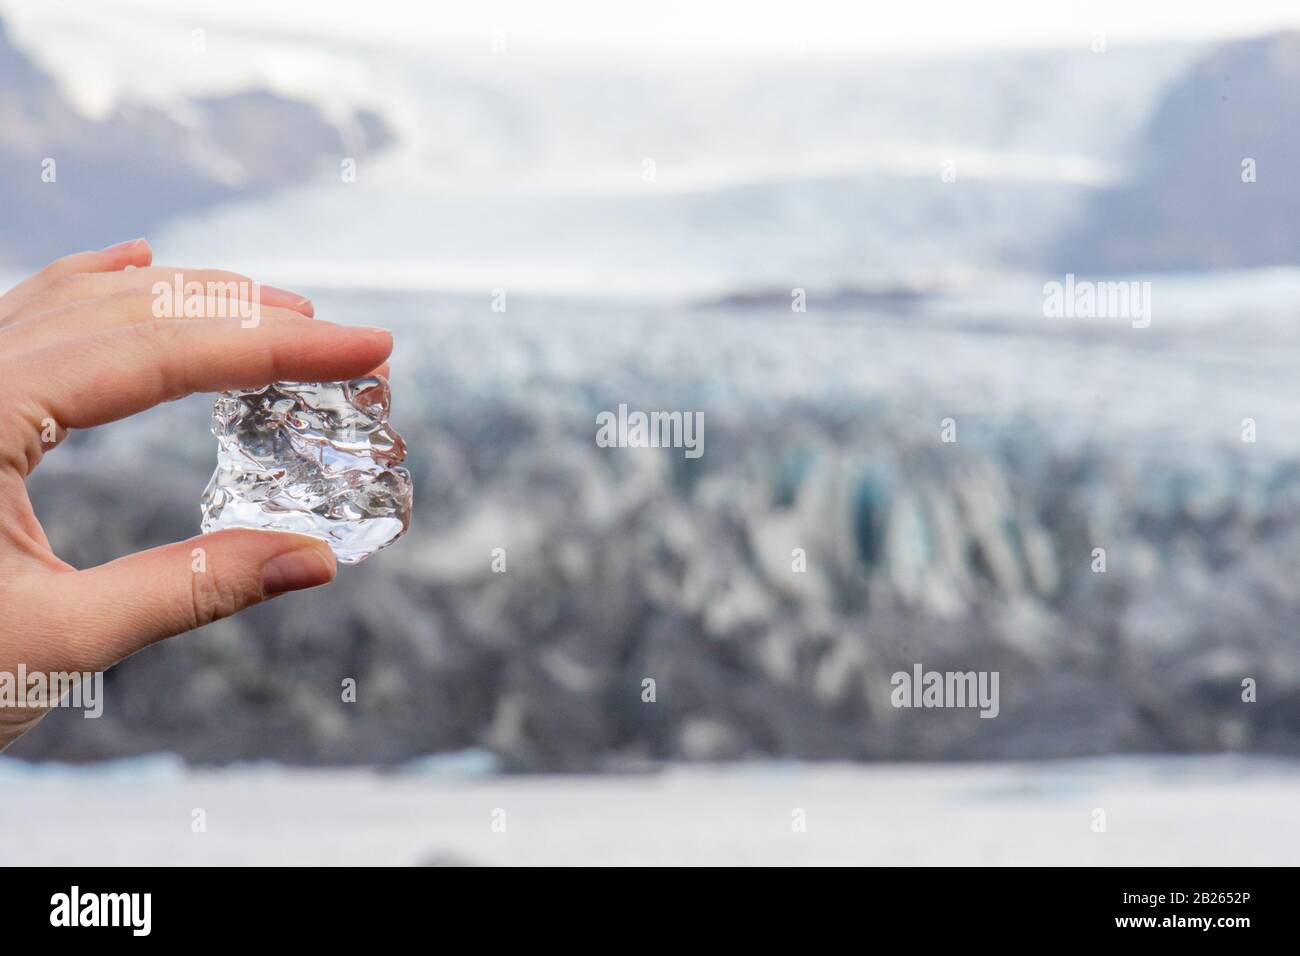 Vatnajoekull glacier in Iceland ice of the glacier between fingers in front of the deep blue ice crevice Stock Photo